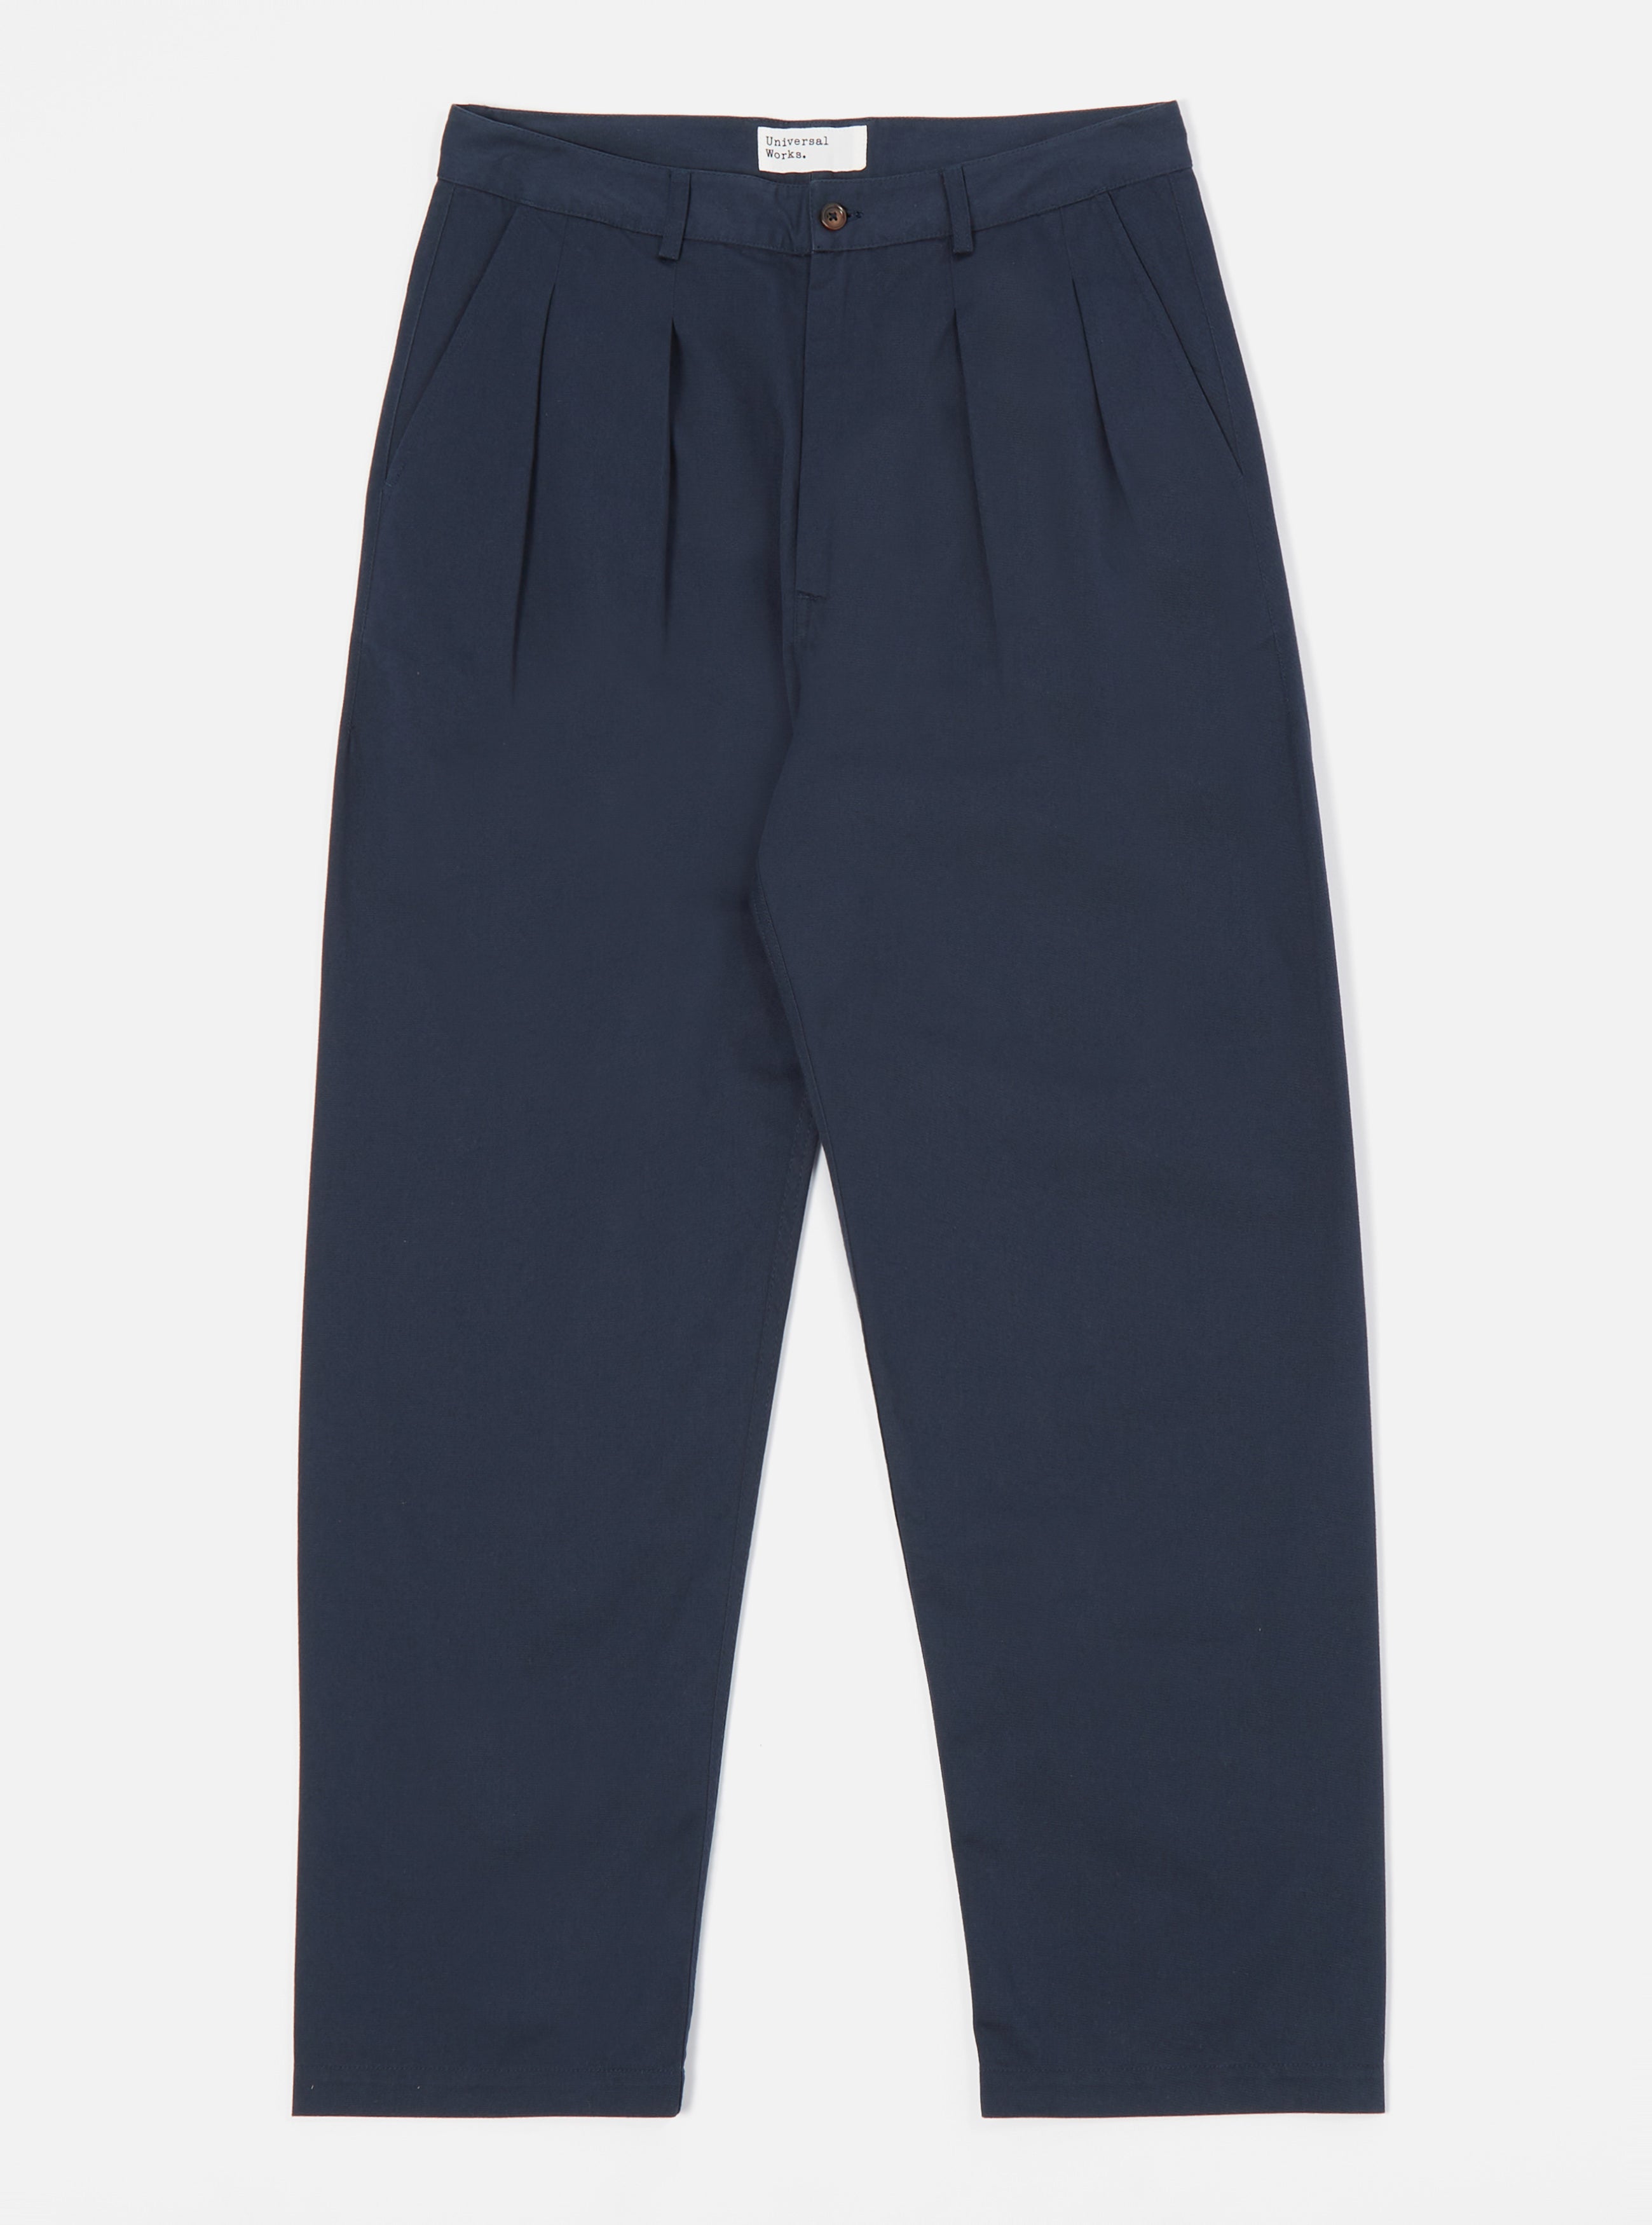 Pleated Trousers - Navy